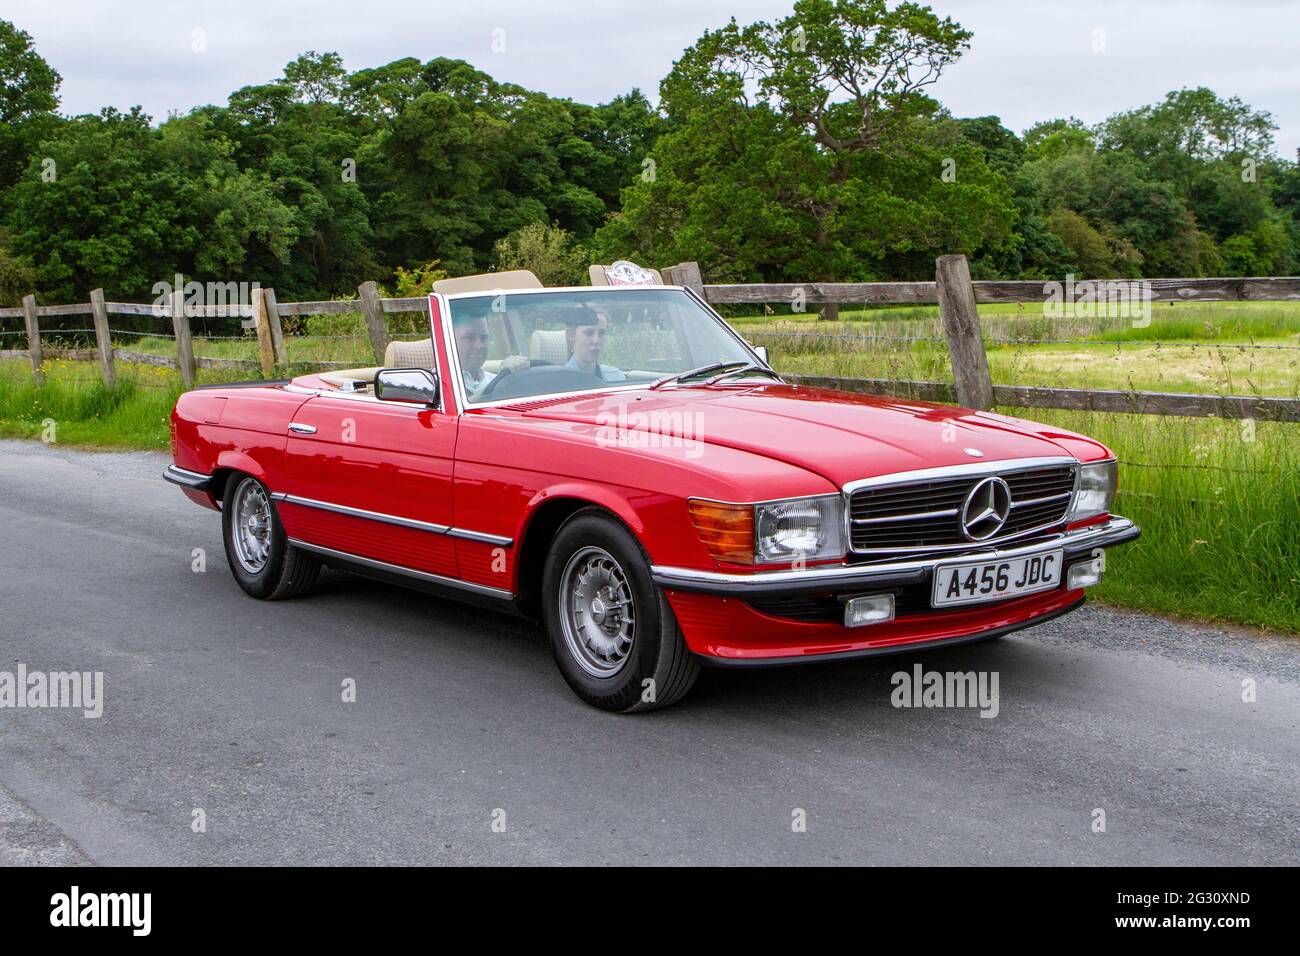 1984 80s Mercedes Benz C200 Elegance at the 58th Annual Manchester to Blackpool Vintage & Classic Car Run The event is a ‘Touring Assembly’ Stock Photo